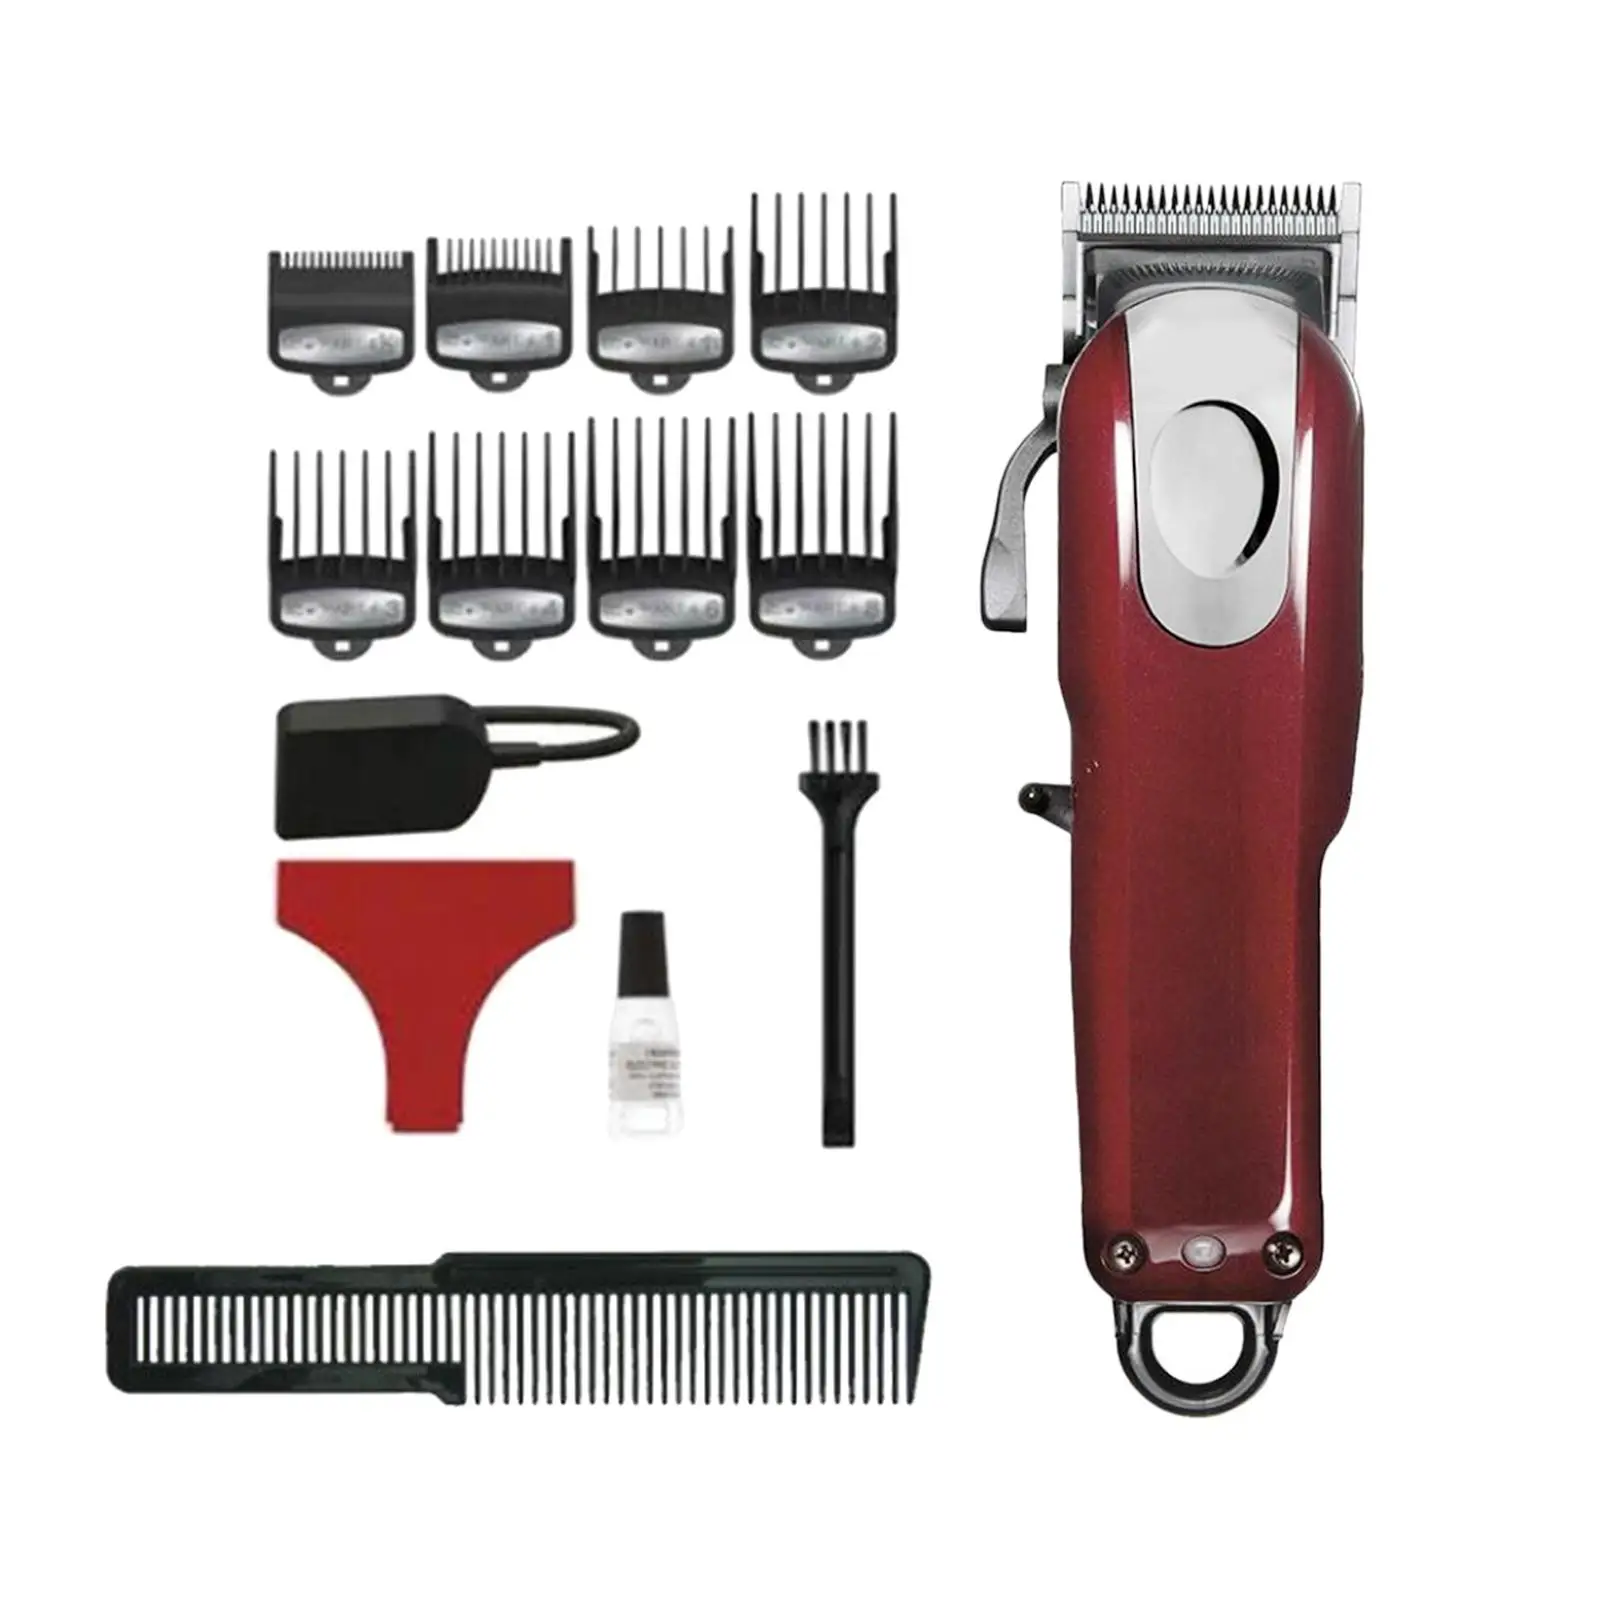 Hair Clipper Kit 8148 Machine Hair Cutting Kit UK Plug for Men Multifunctional with Oil Bottle with Styling Comb Grooming Sturdy